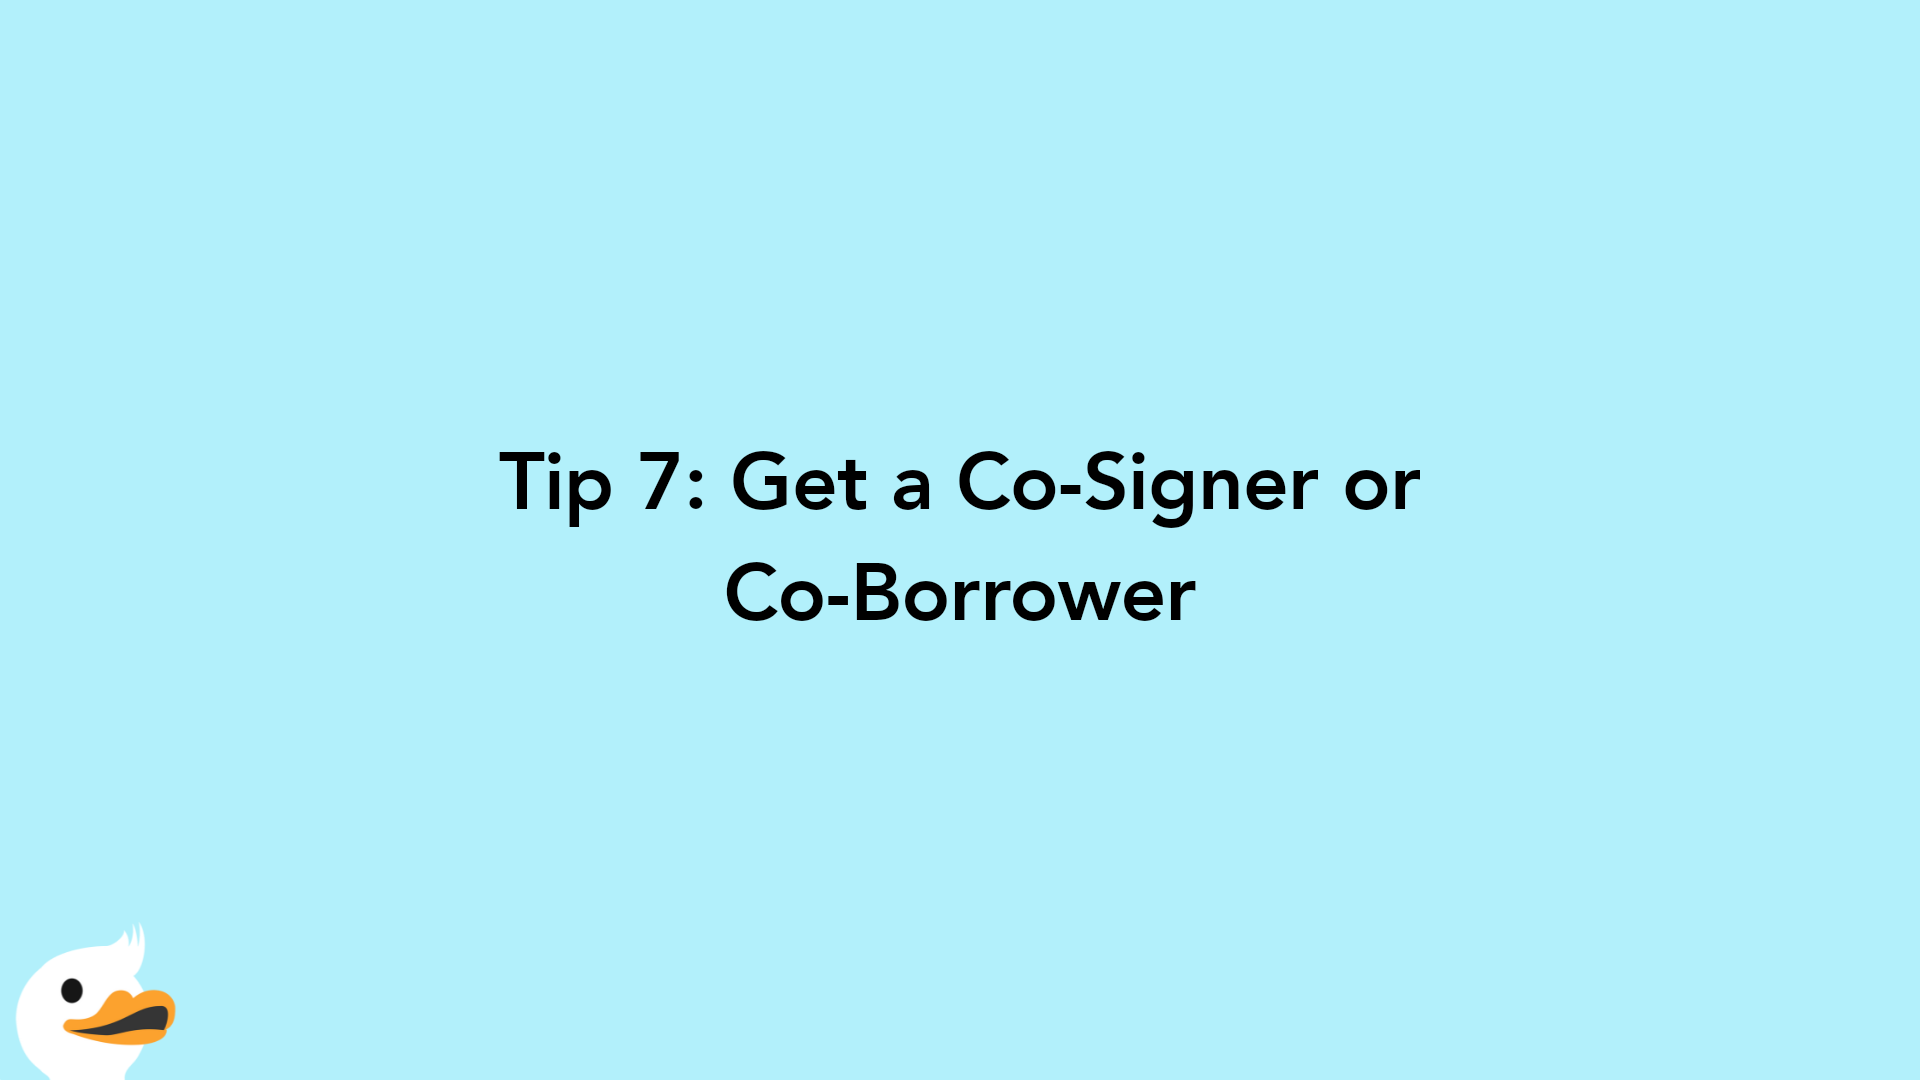 Tip 7: Get a Co-Signer or Co-Borrower